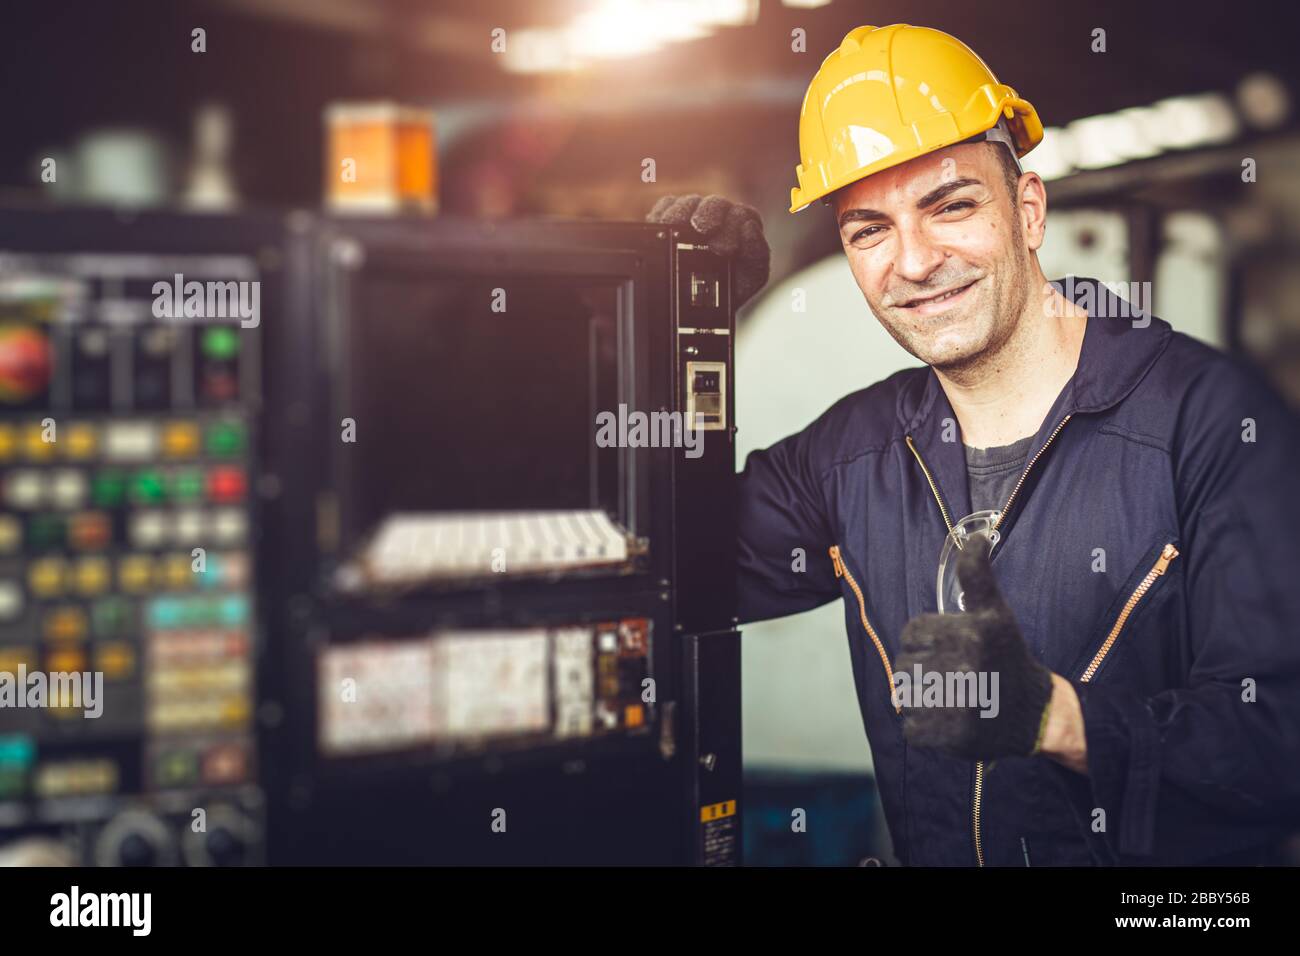 Happy worker, portrait handsome labor thumb signal with safety suit at machine control panel in factory. Stock Photo